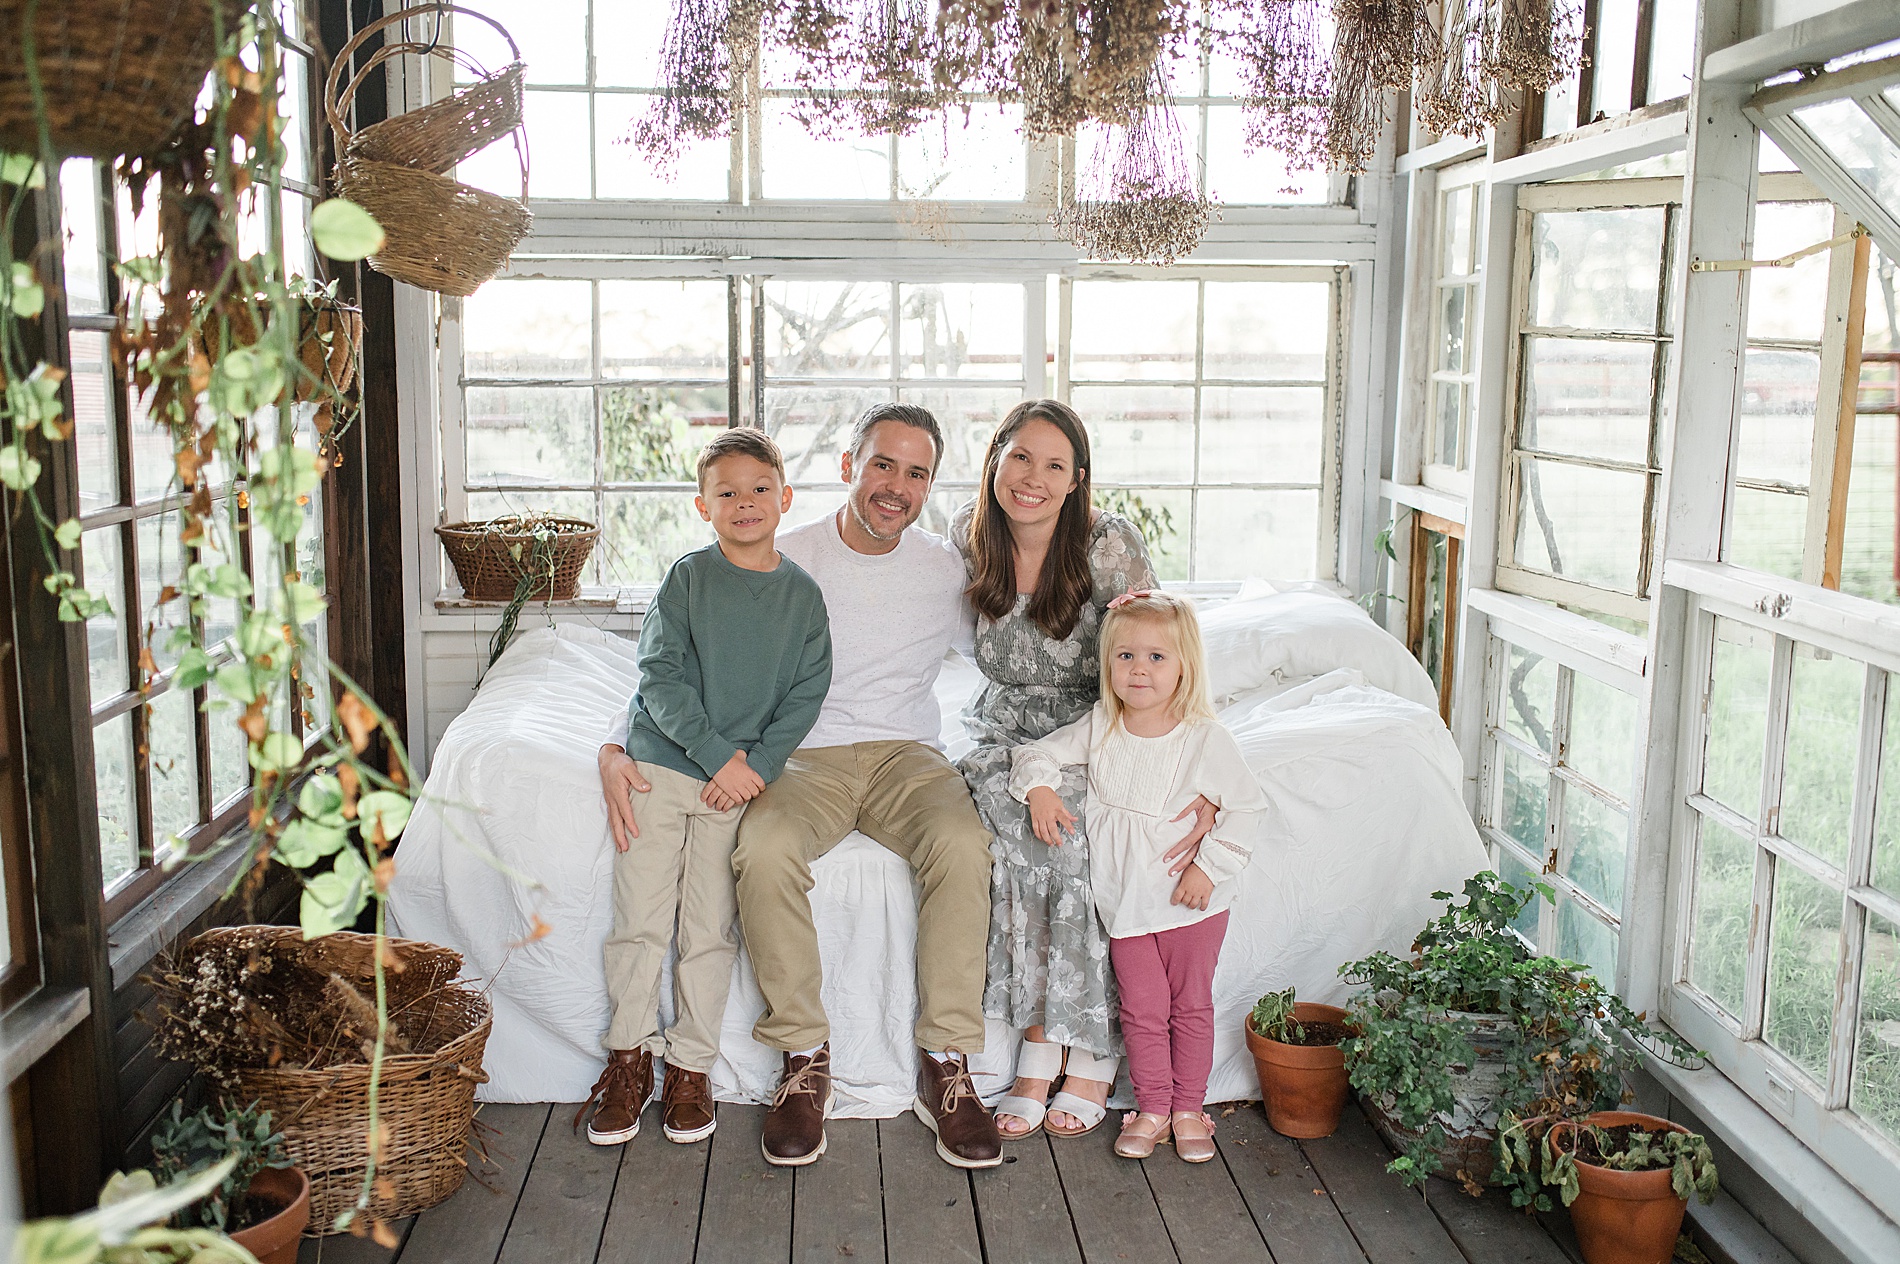 Family portraits inside greenhouse photographed by Lindsey Dutton Photography, a Dallas Family photographer
